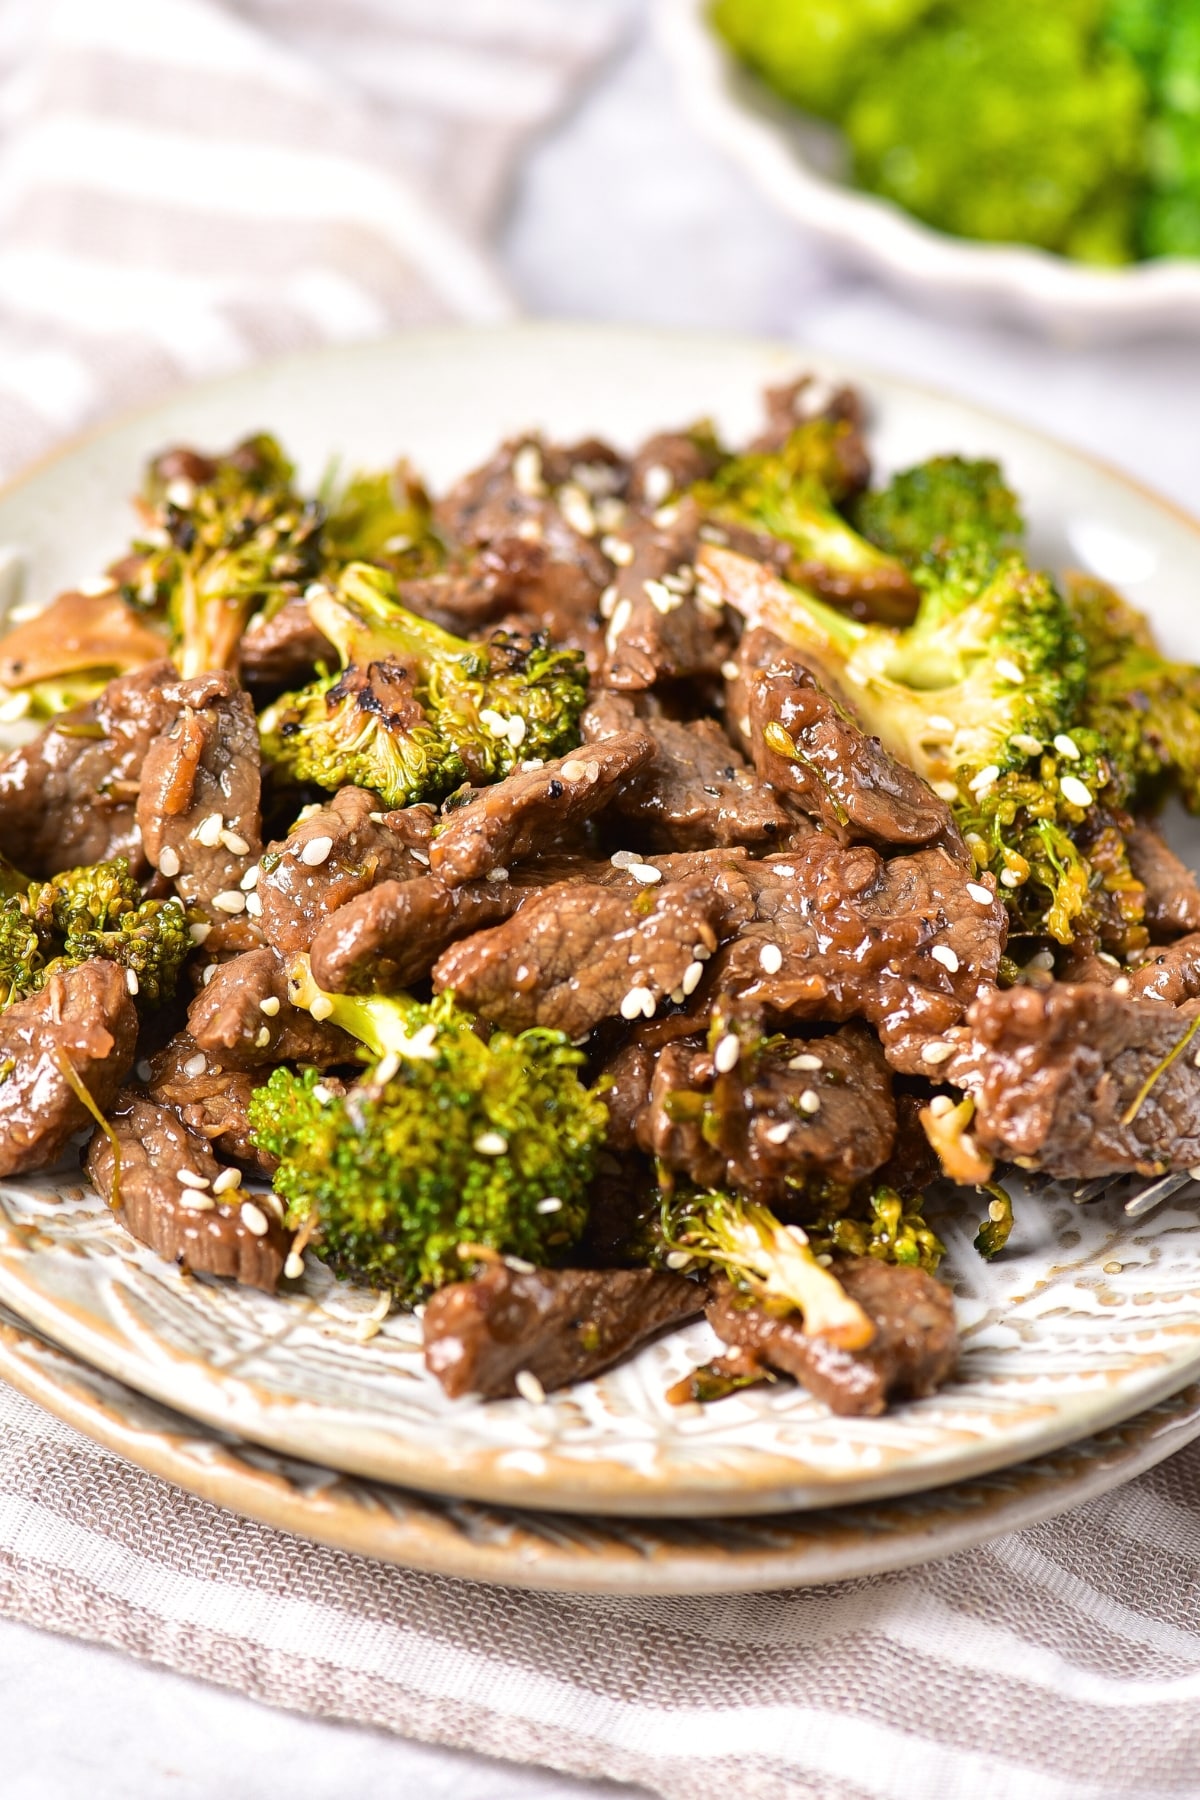 Gluten-free beef and broccoli on a plate.